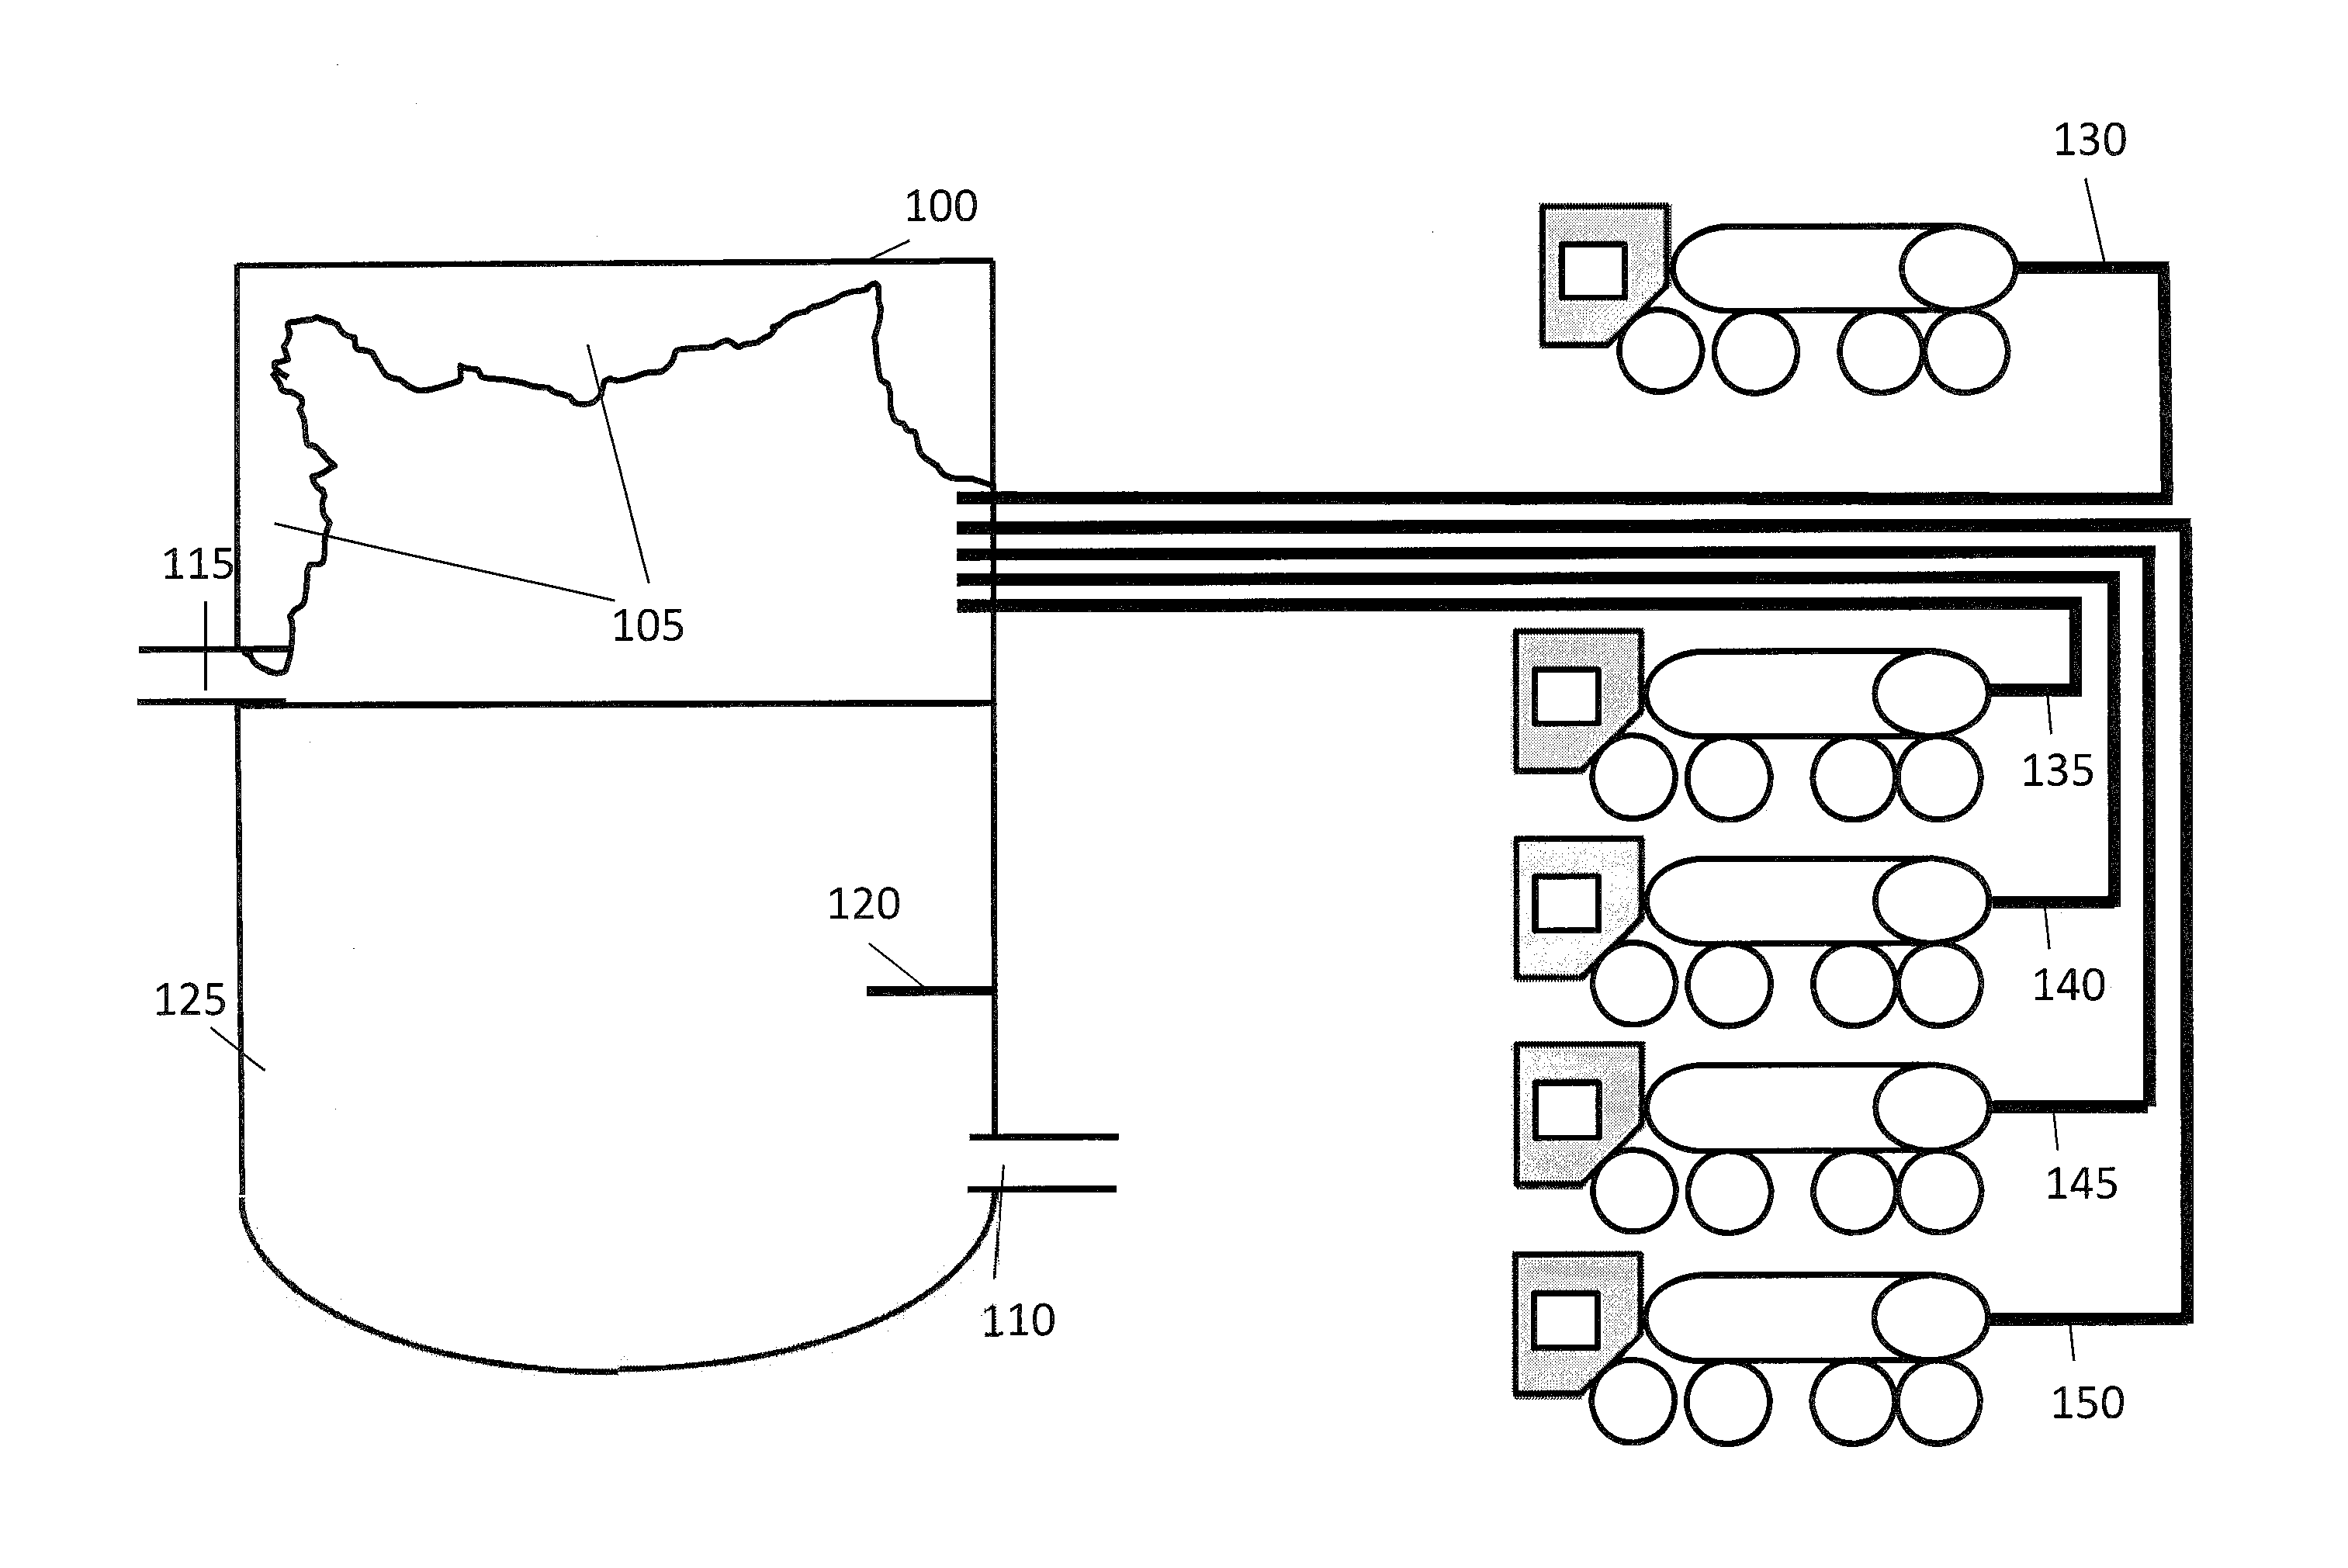 Method for cleaning a waste water vessel for the waste water industry